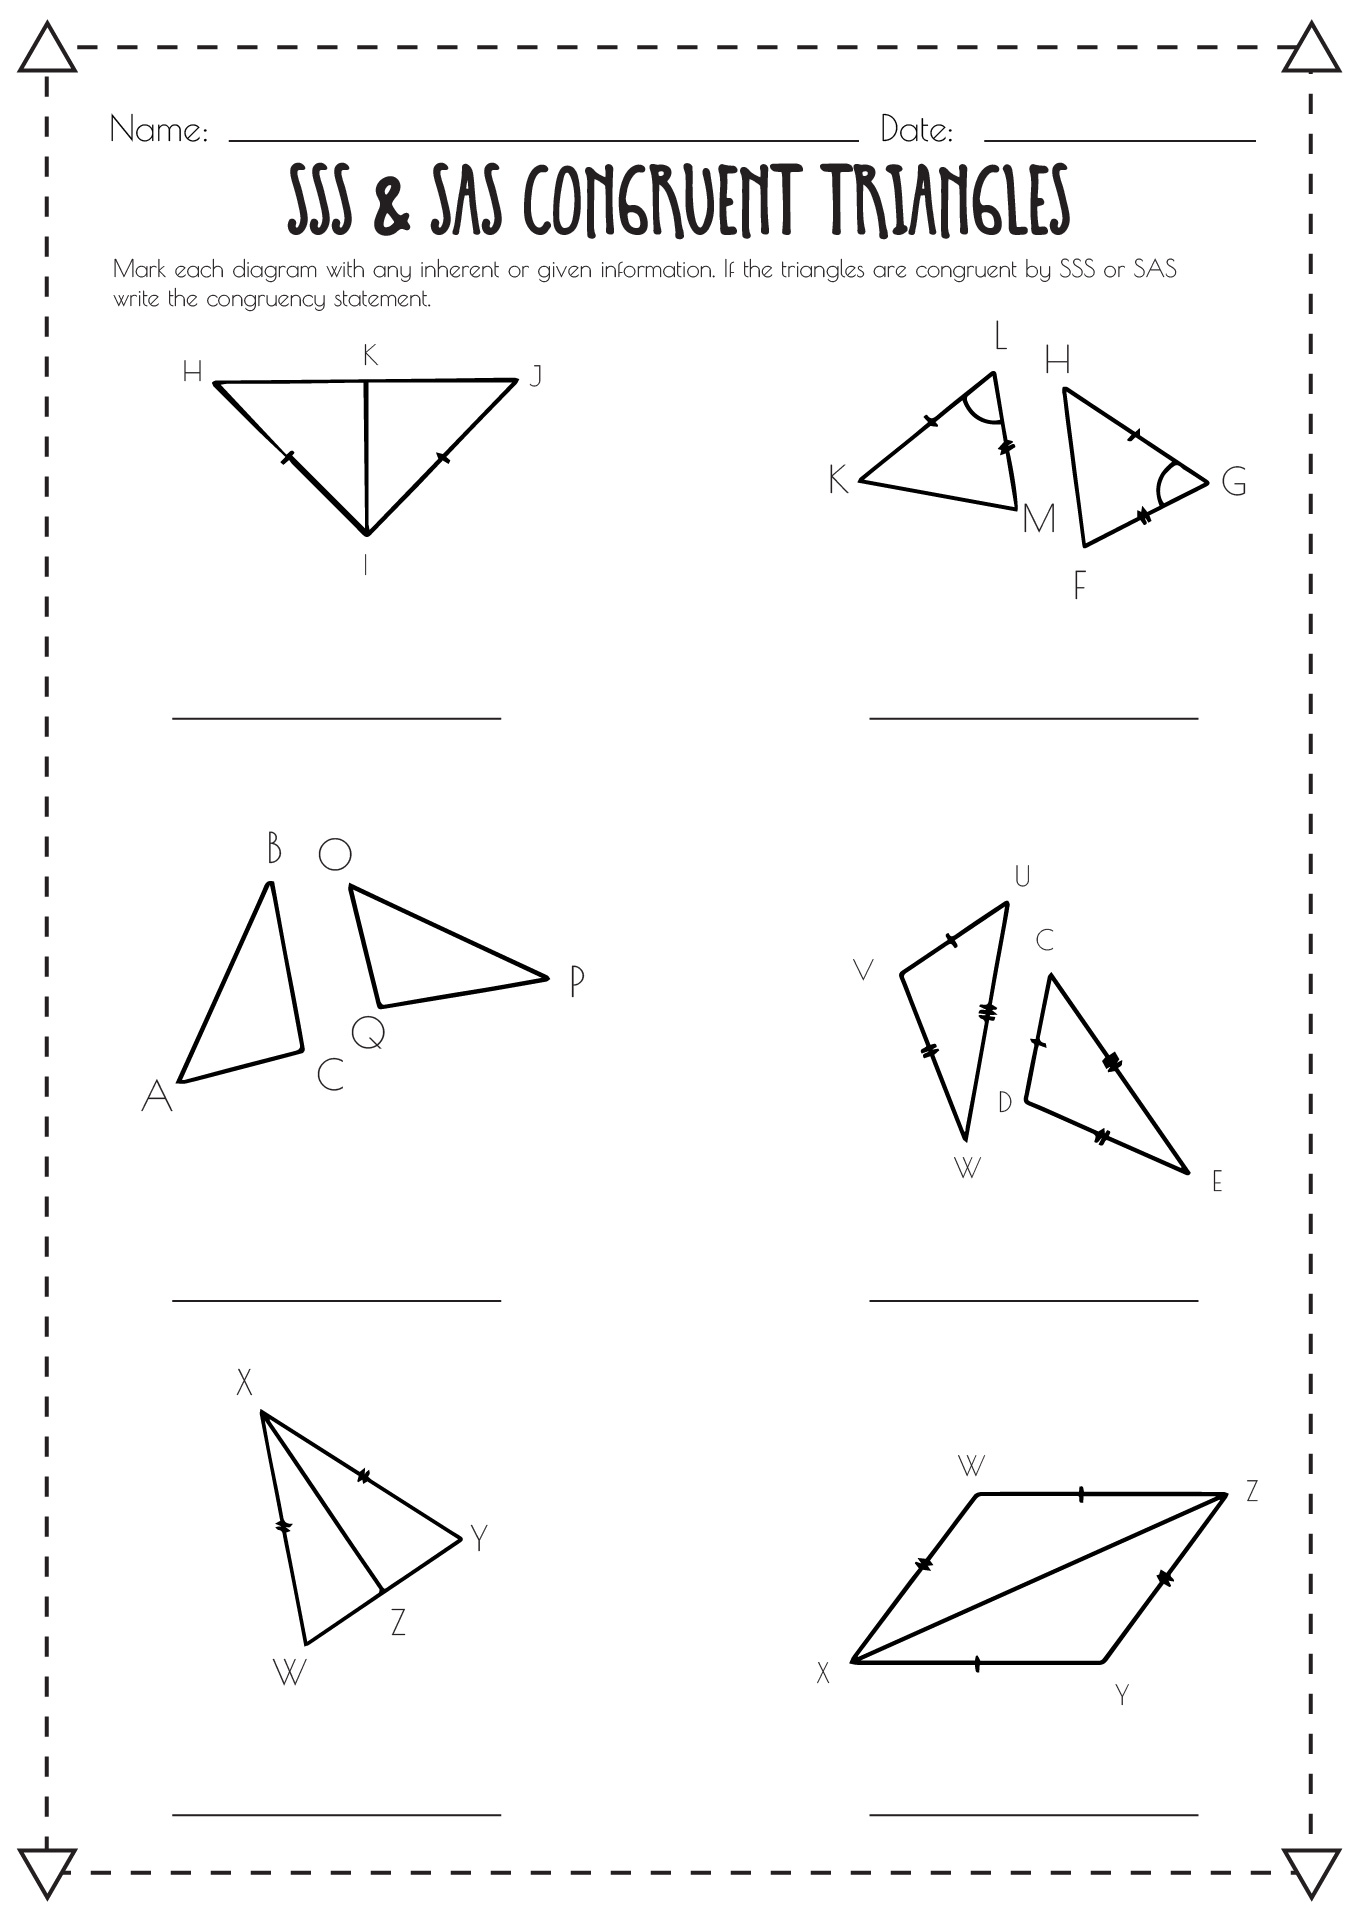 13 Best Images of Proving Triangles Congruent Worksheet - SSS and SAS